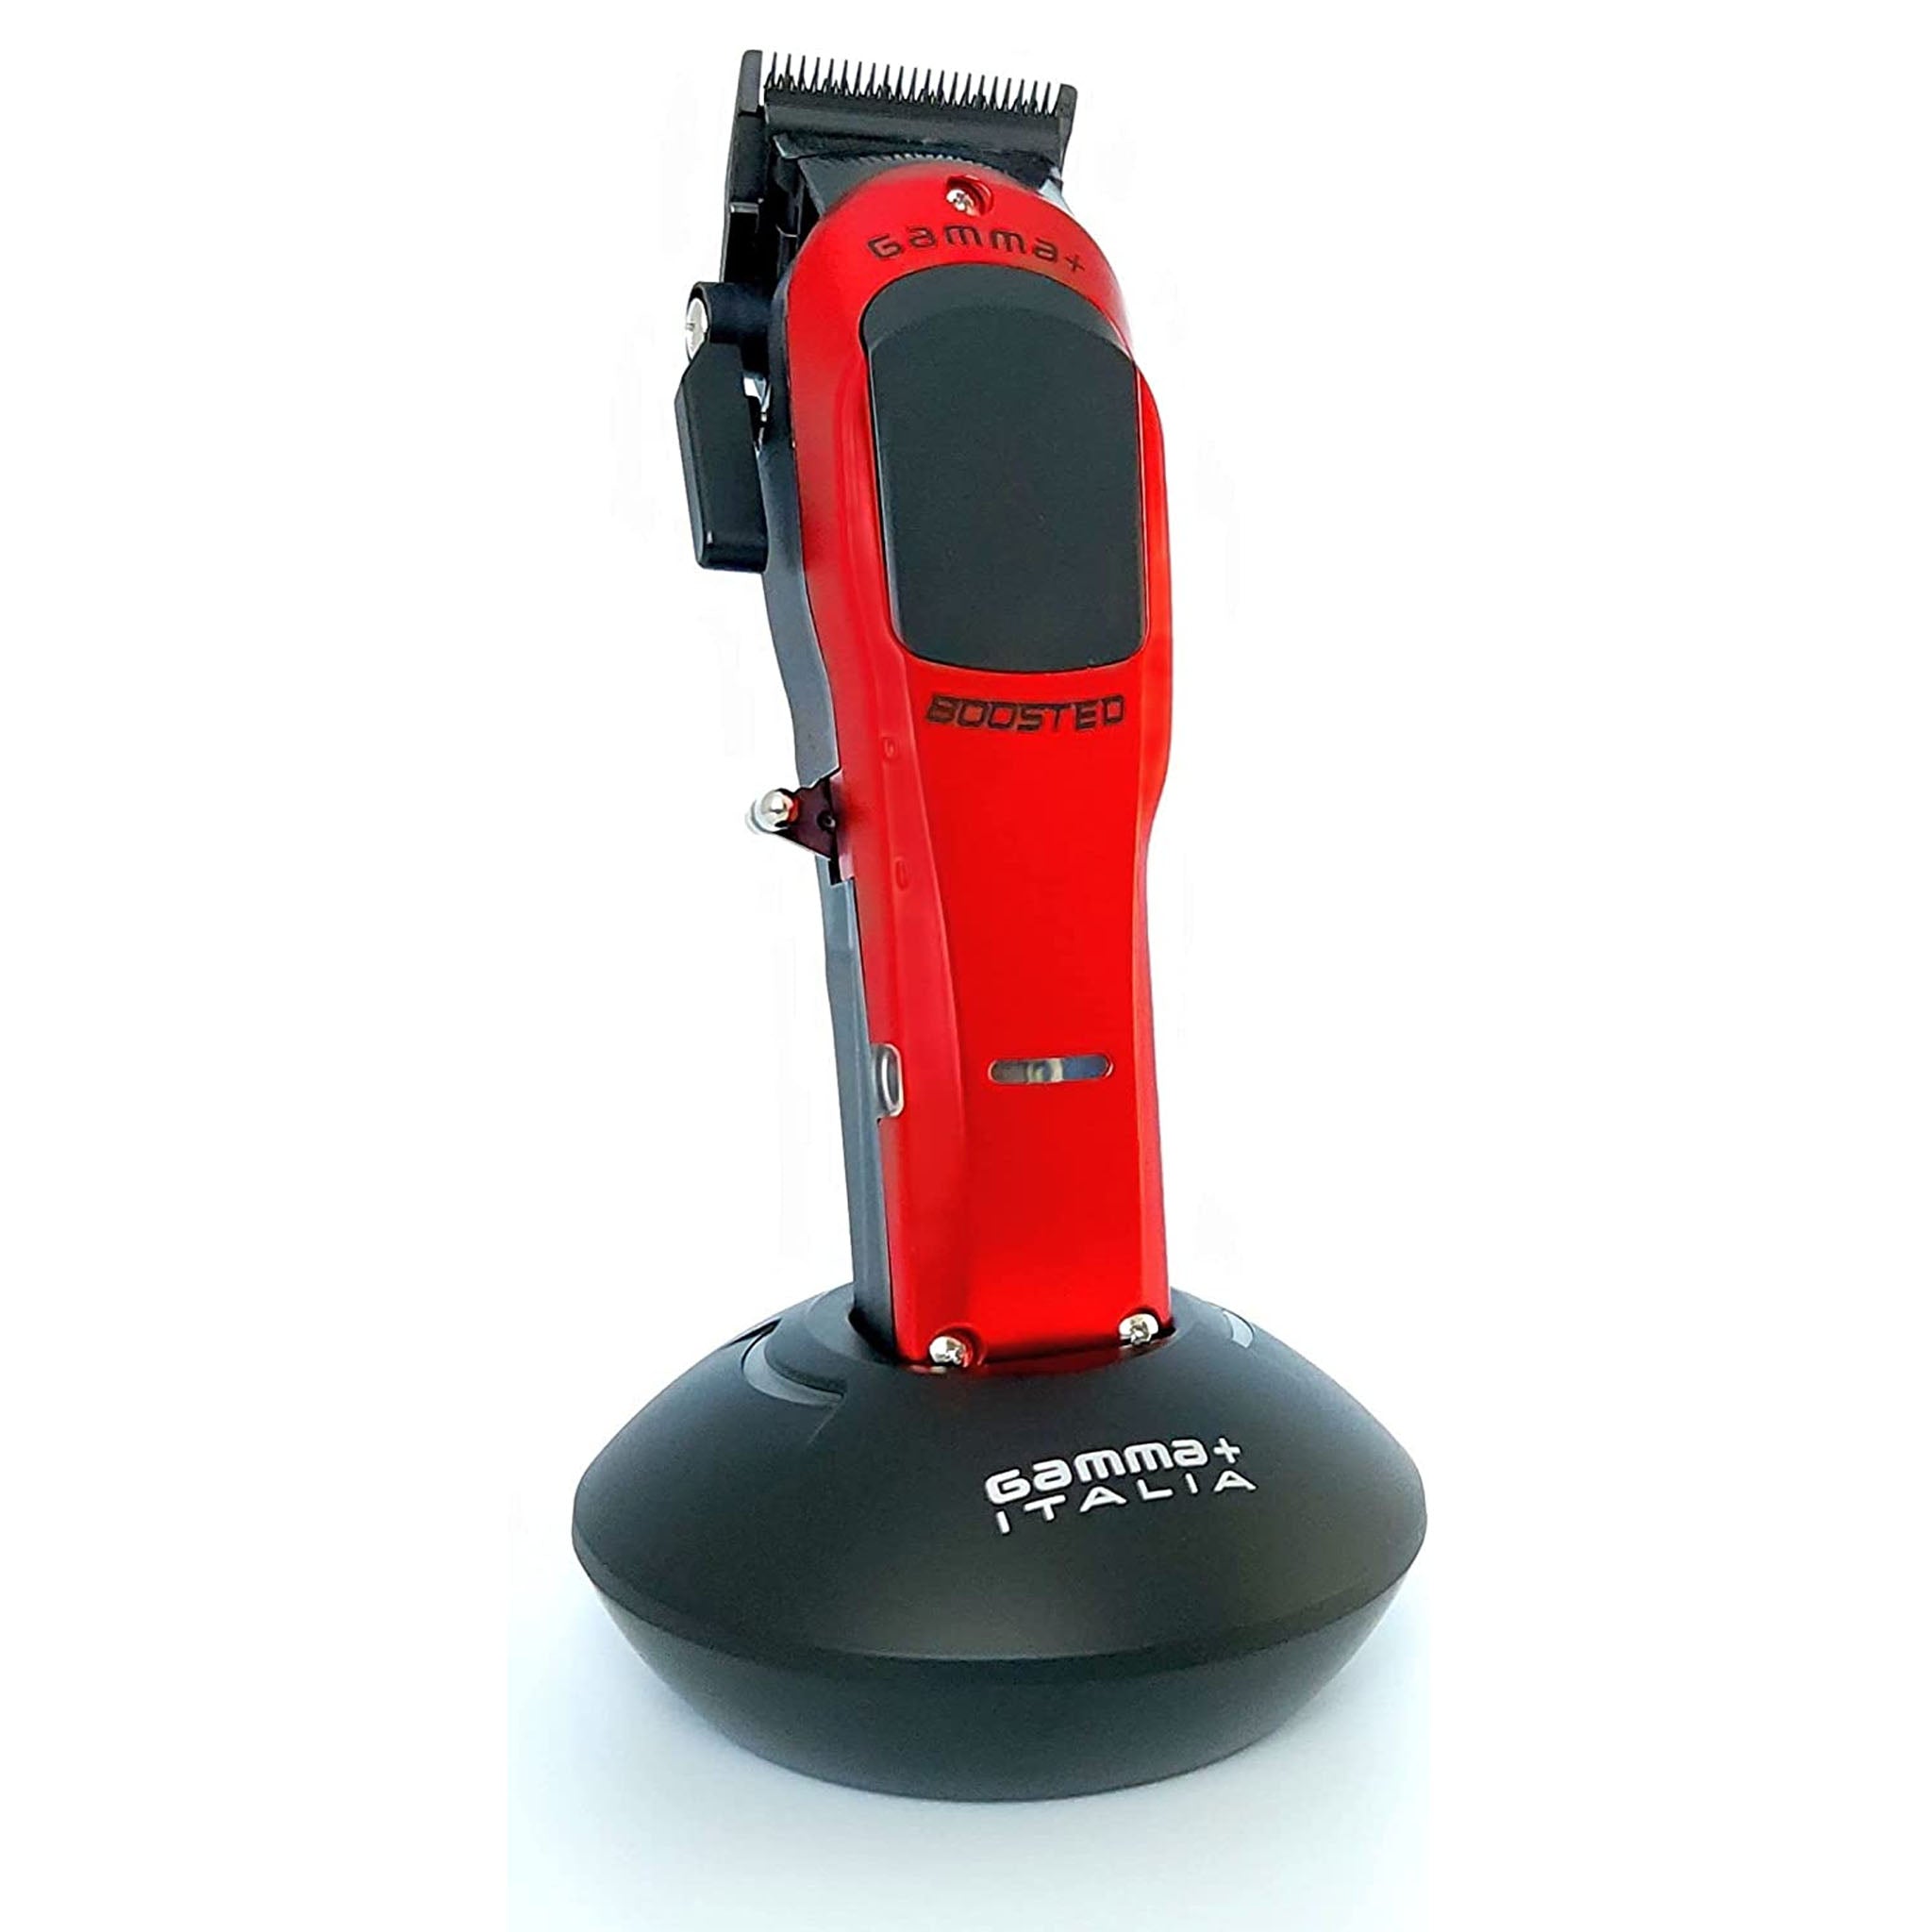 Gamma+ Boosted Cordless Clipper Super-Torque Modular + FREE Style